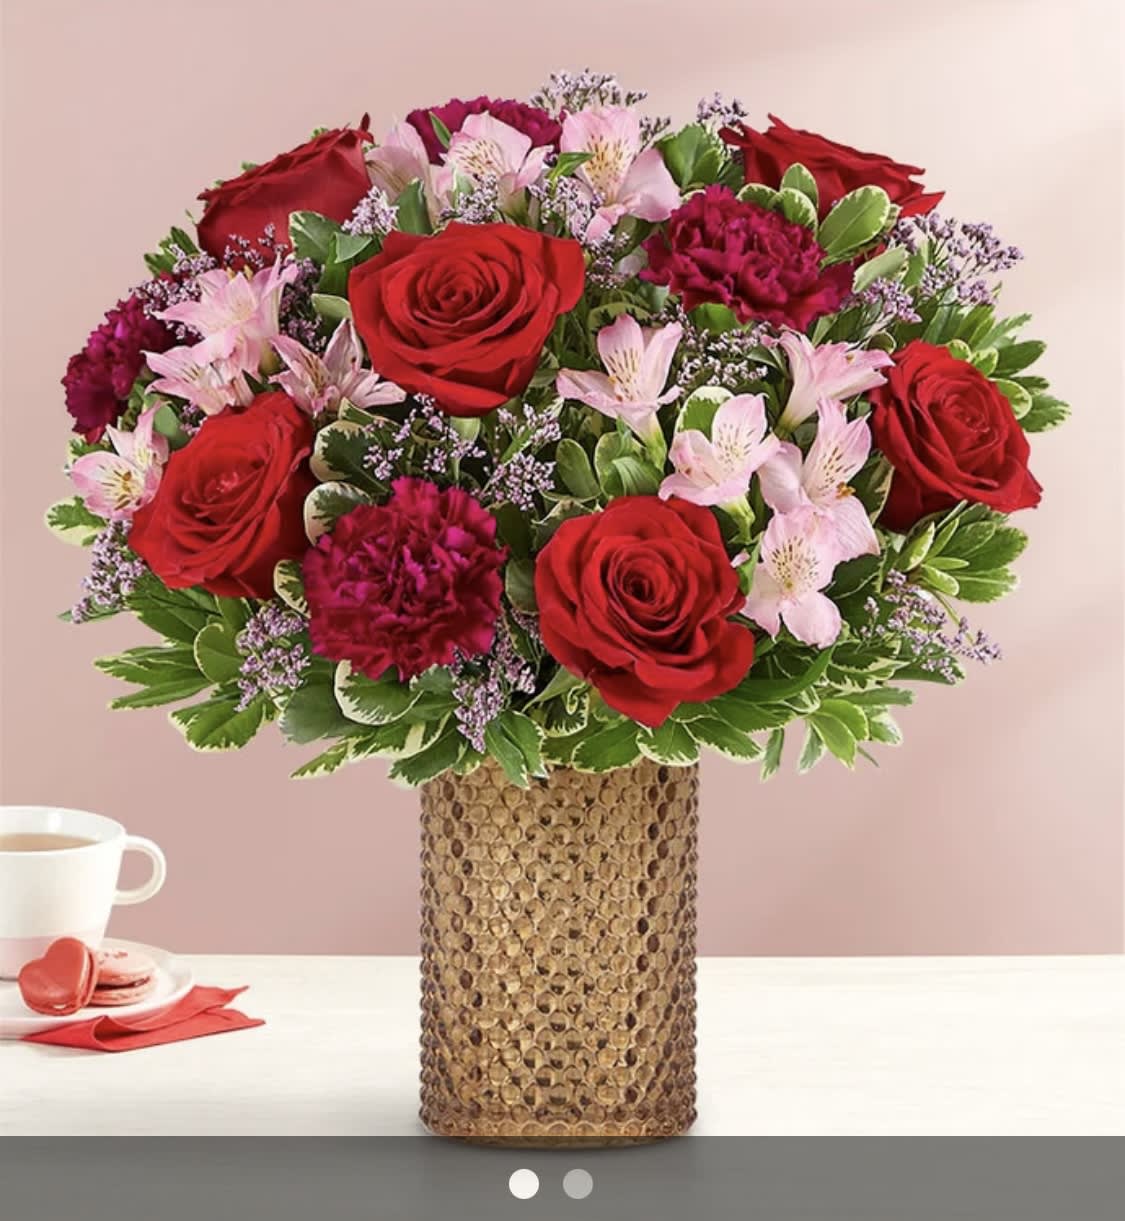 Victorian BOUQUET - Description EXCLUSIVE  captured in flowers. Our striking bouquet is gathered with rich red, pink and purple blooms and accented with lush greenery. Designed in our Victorian-inspired hobnail vase, featuring a champagne mercury finish, this gift leaves a lasting impression on someone you love.